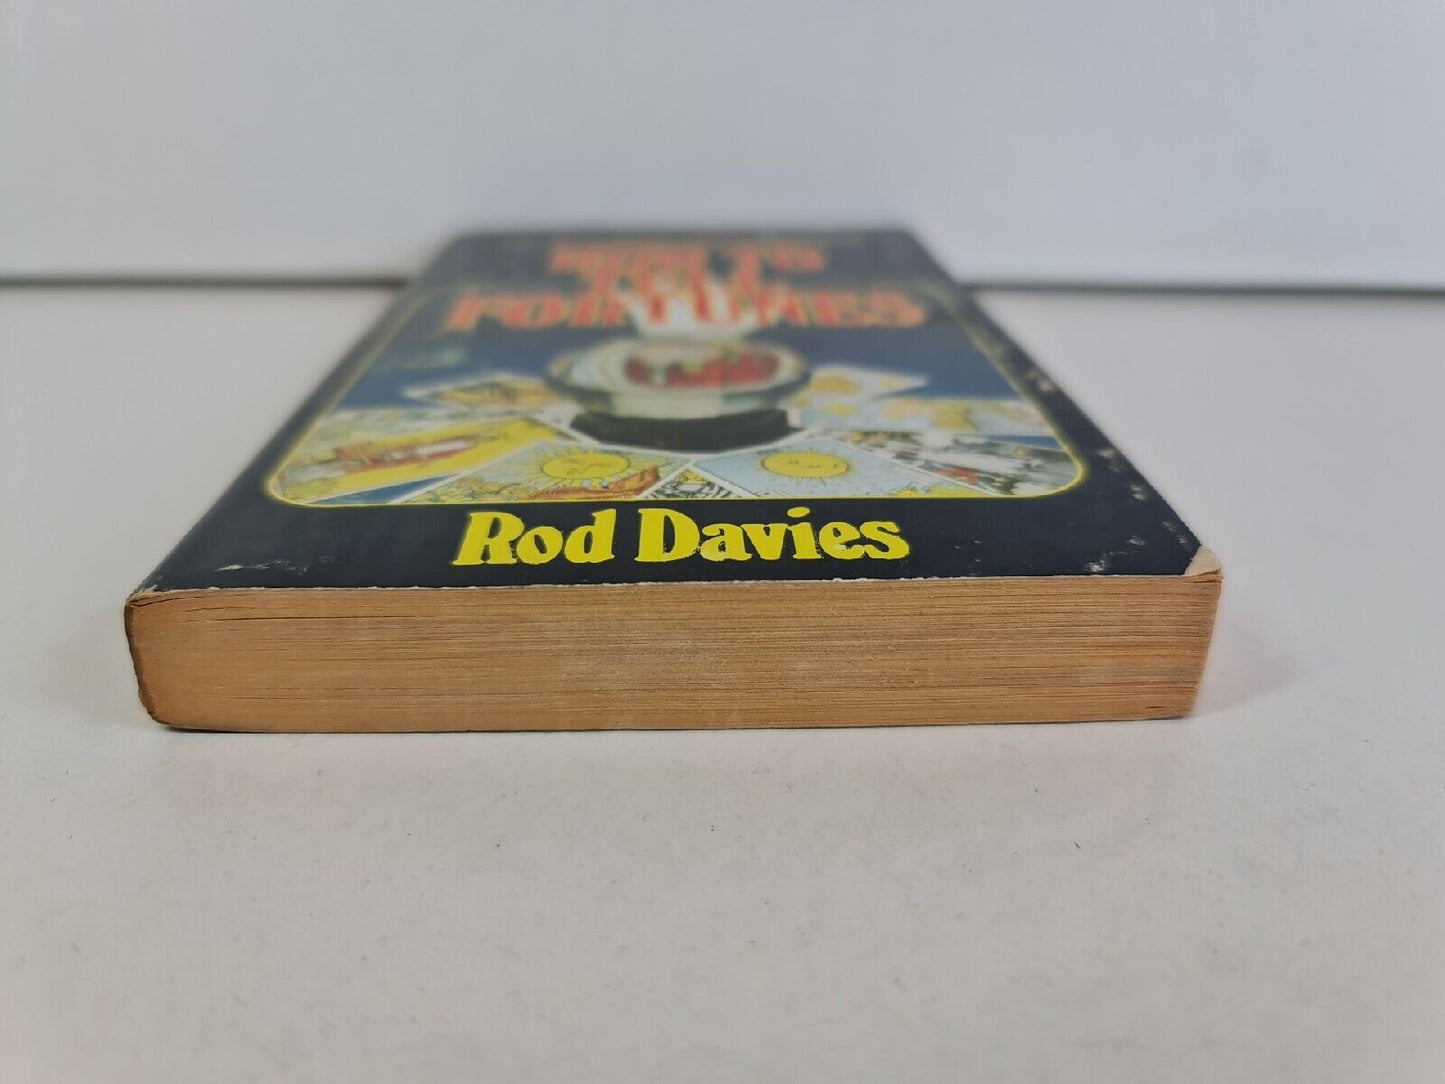 How To Tell Fortunes by Rod Davies (1976)